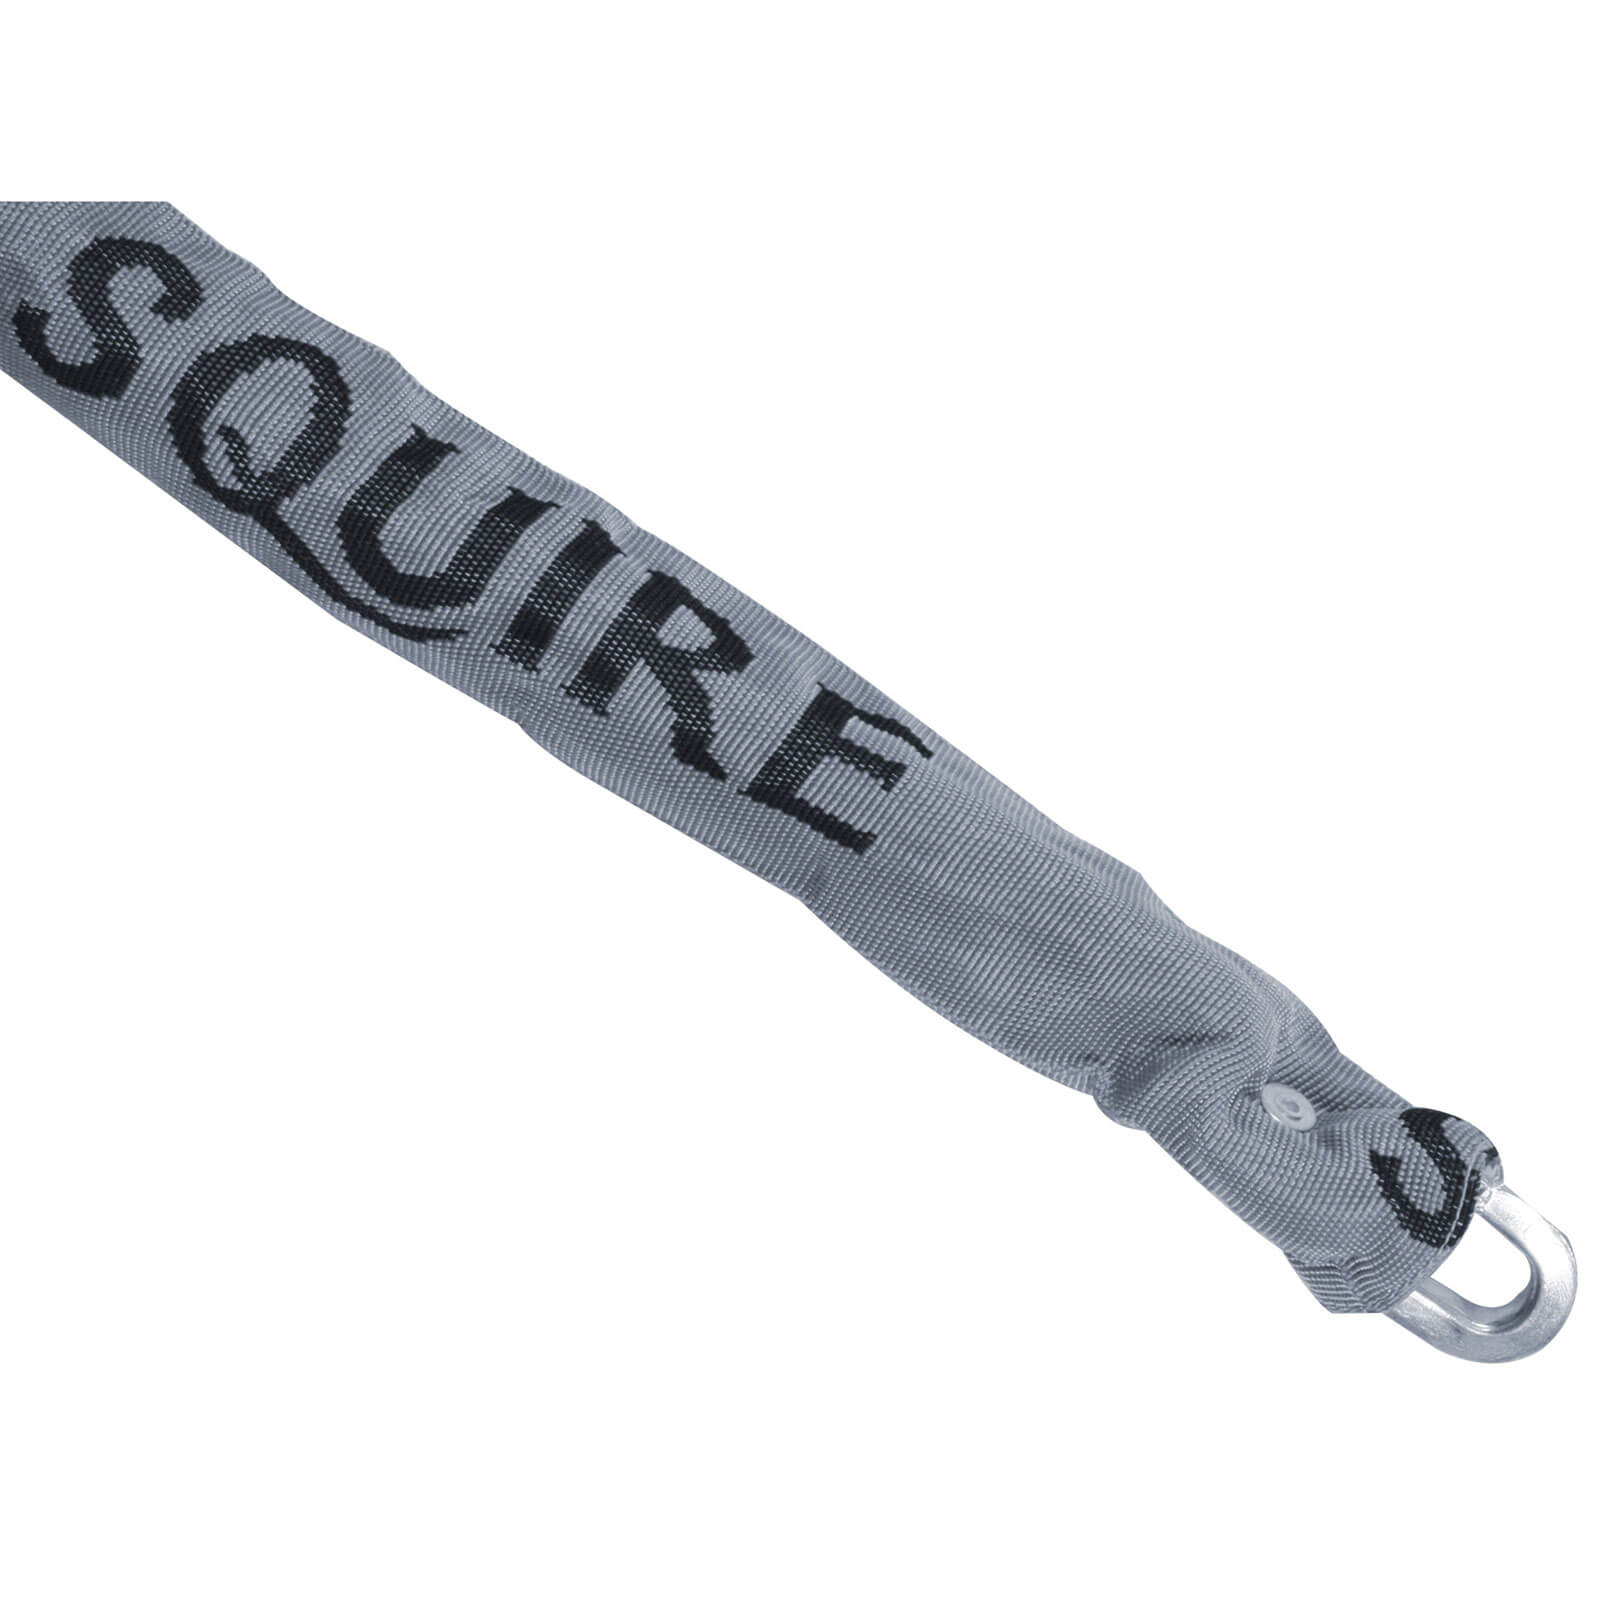 Henry Squire X3 Square Section Hardened Security Chain 09 Metre x 8mm